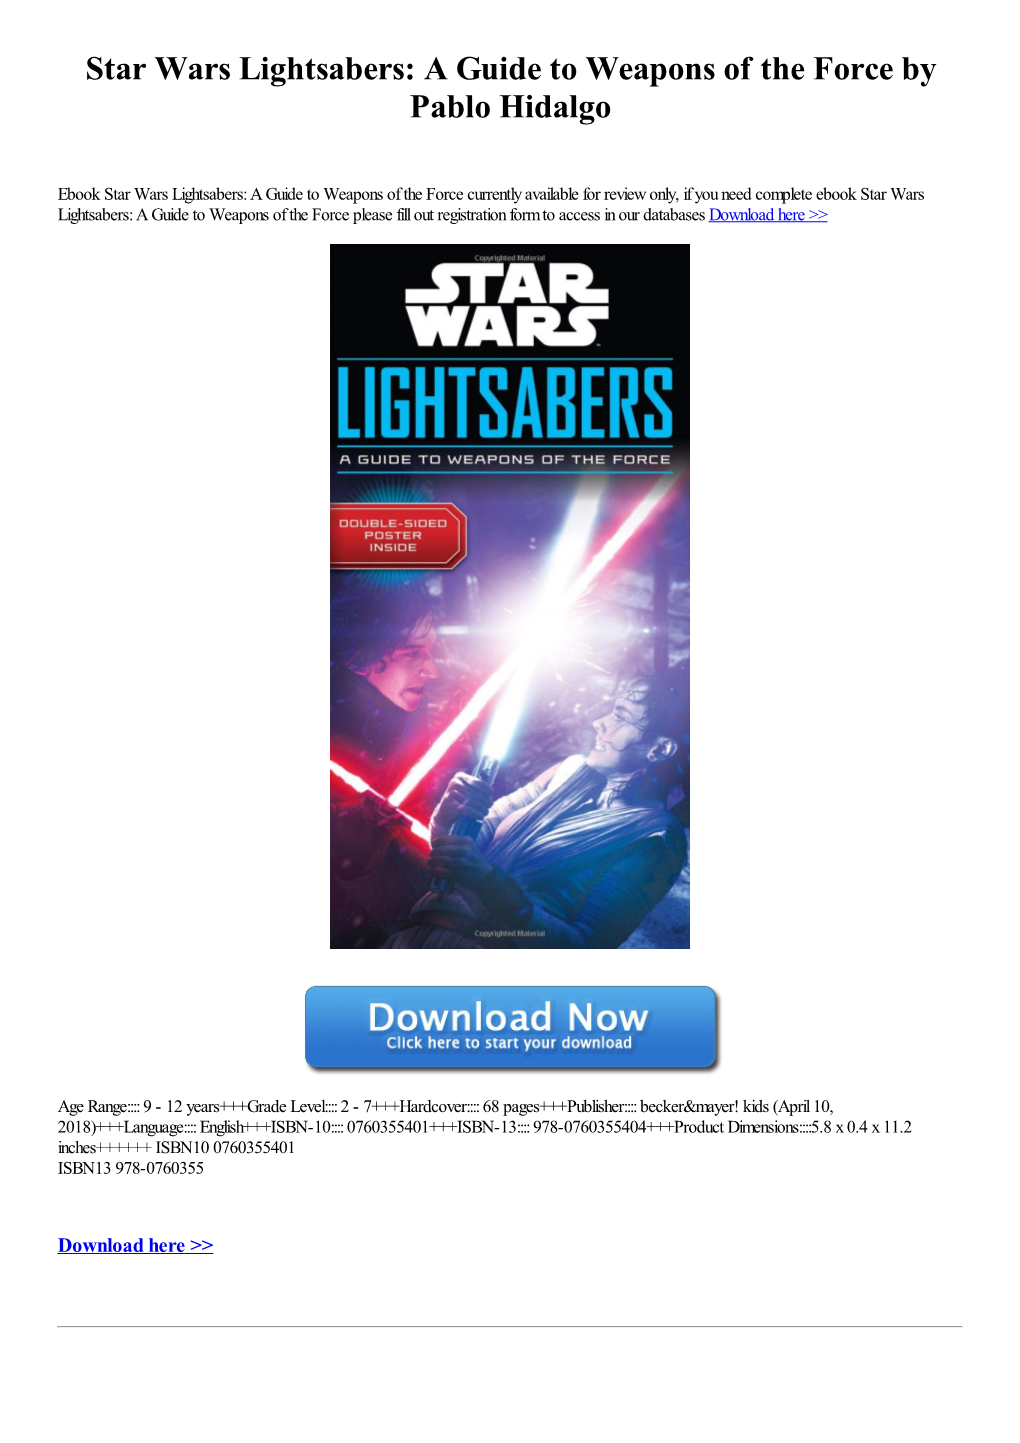 Star Wars Lightsabers: a Guide to Weapons of the Force by Pablo Hidalgo